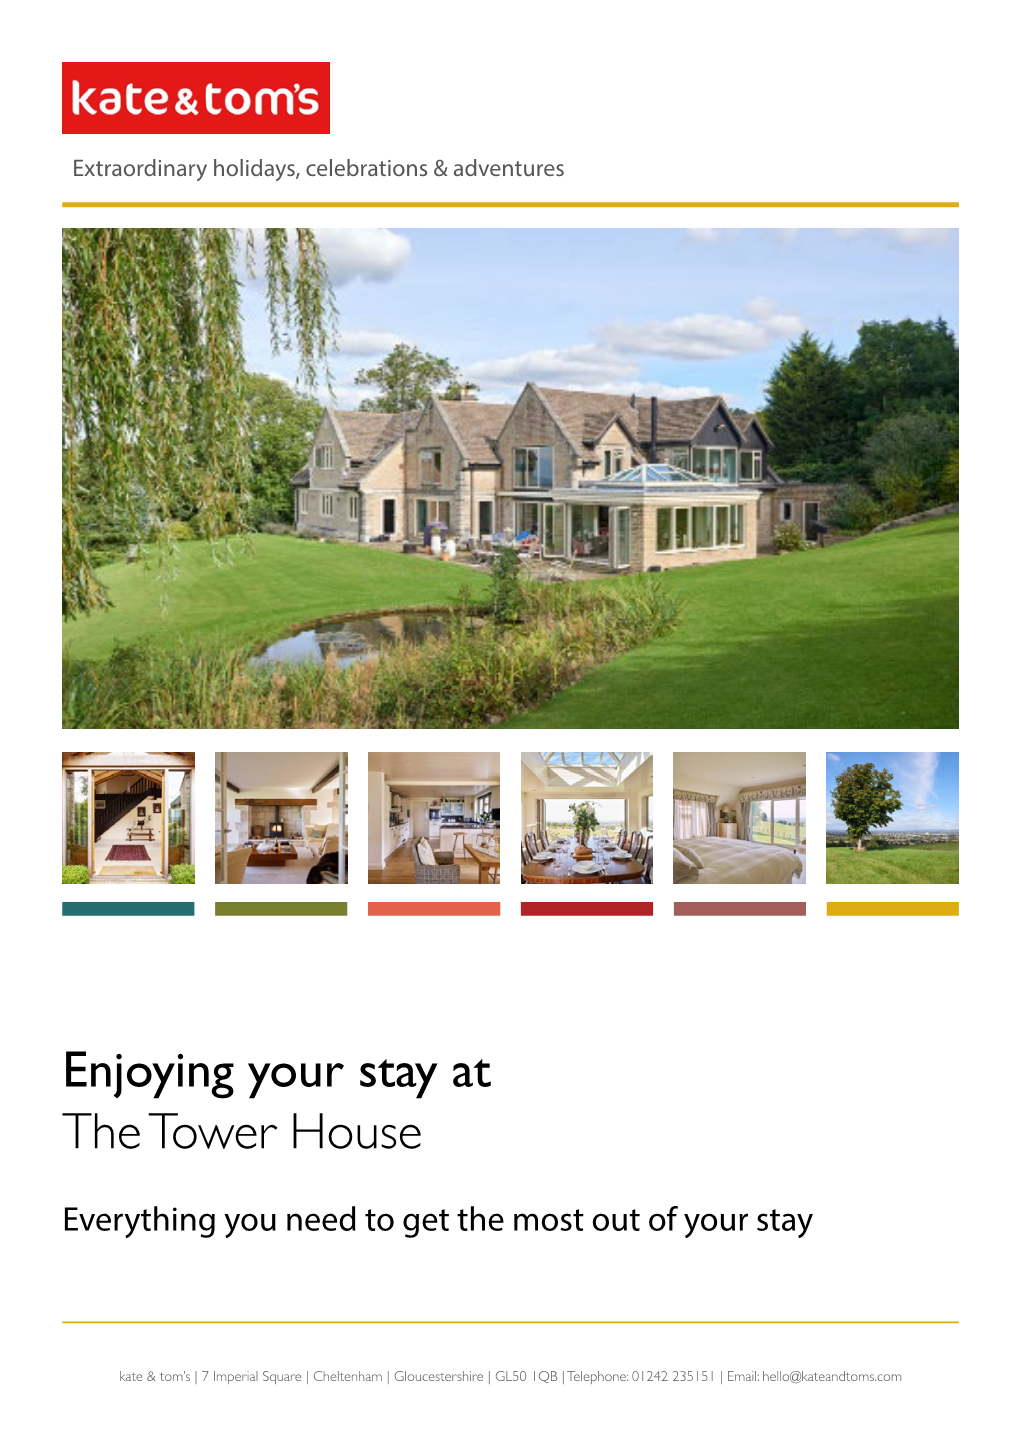 Enjoying Your Stay at the Tower House